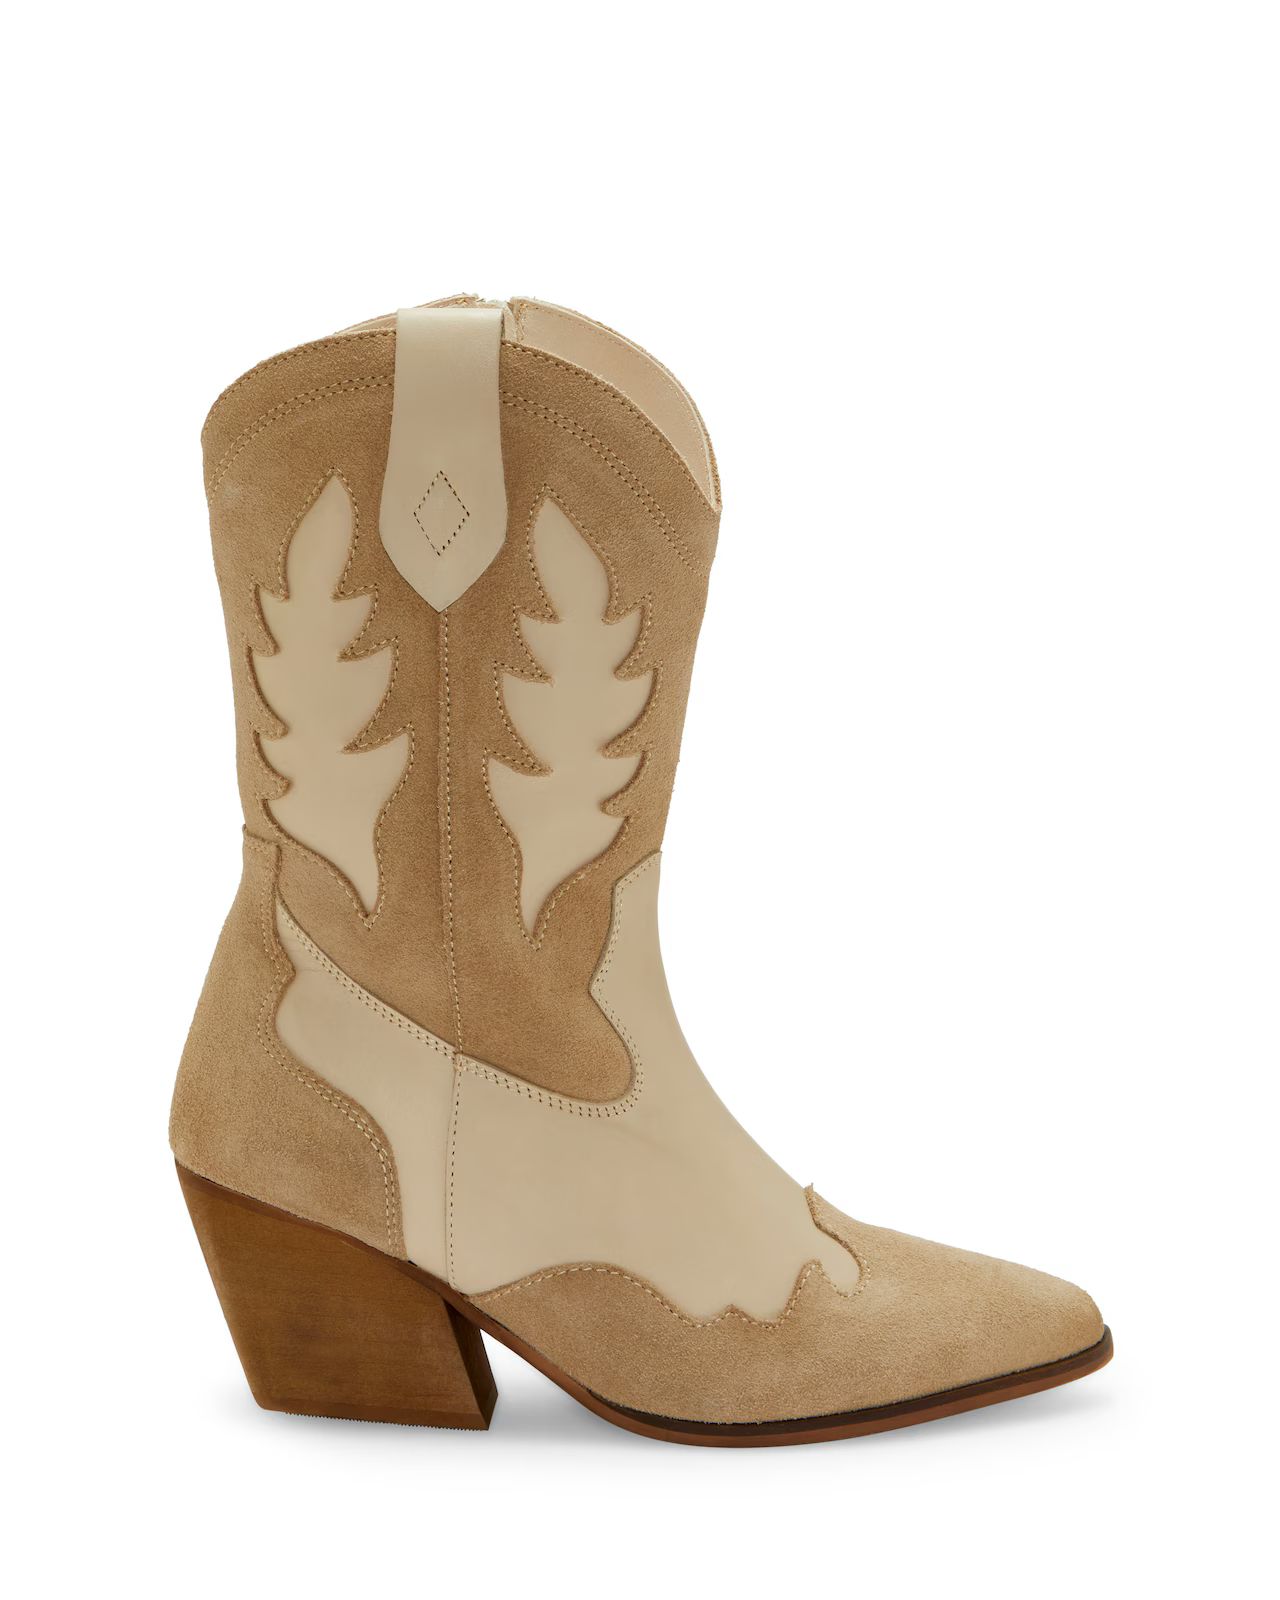 Vince Camuto Lunnia Bootie | Vince Camuto